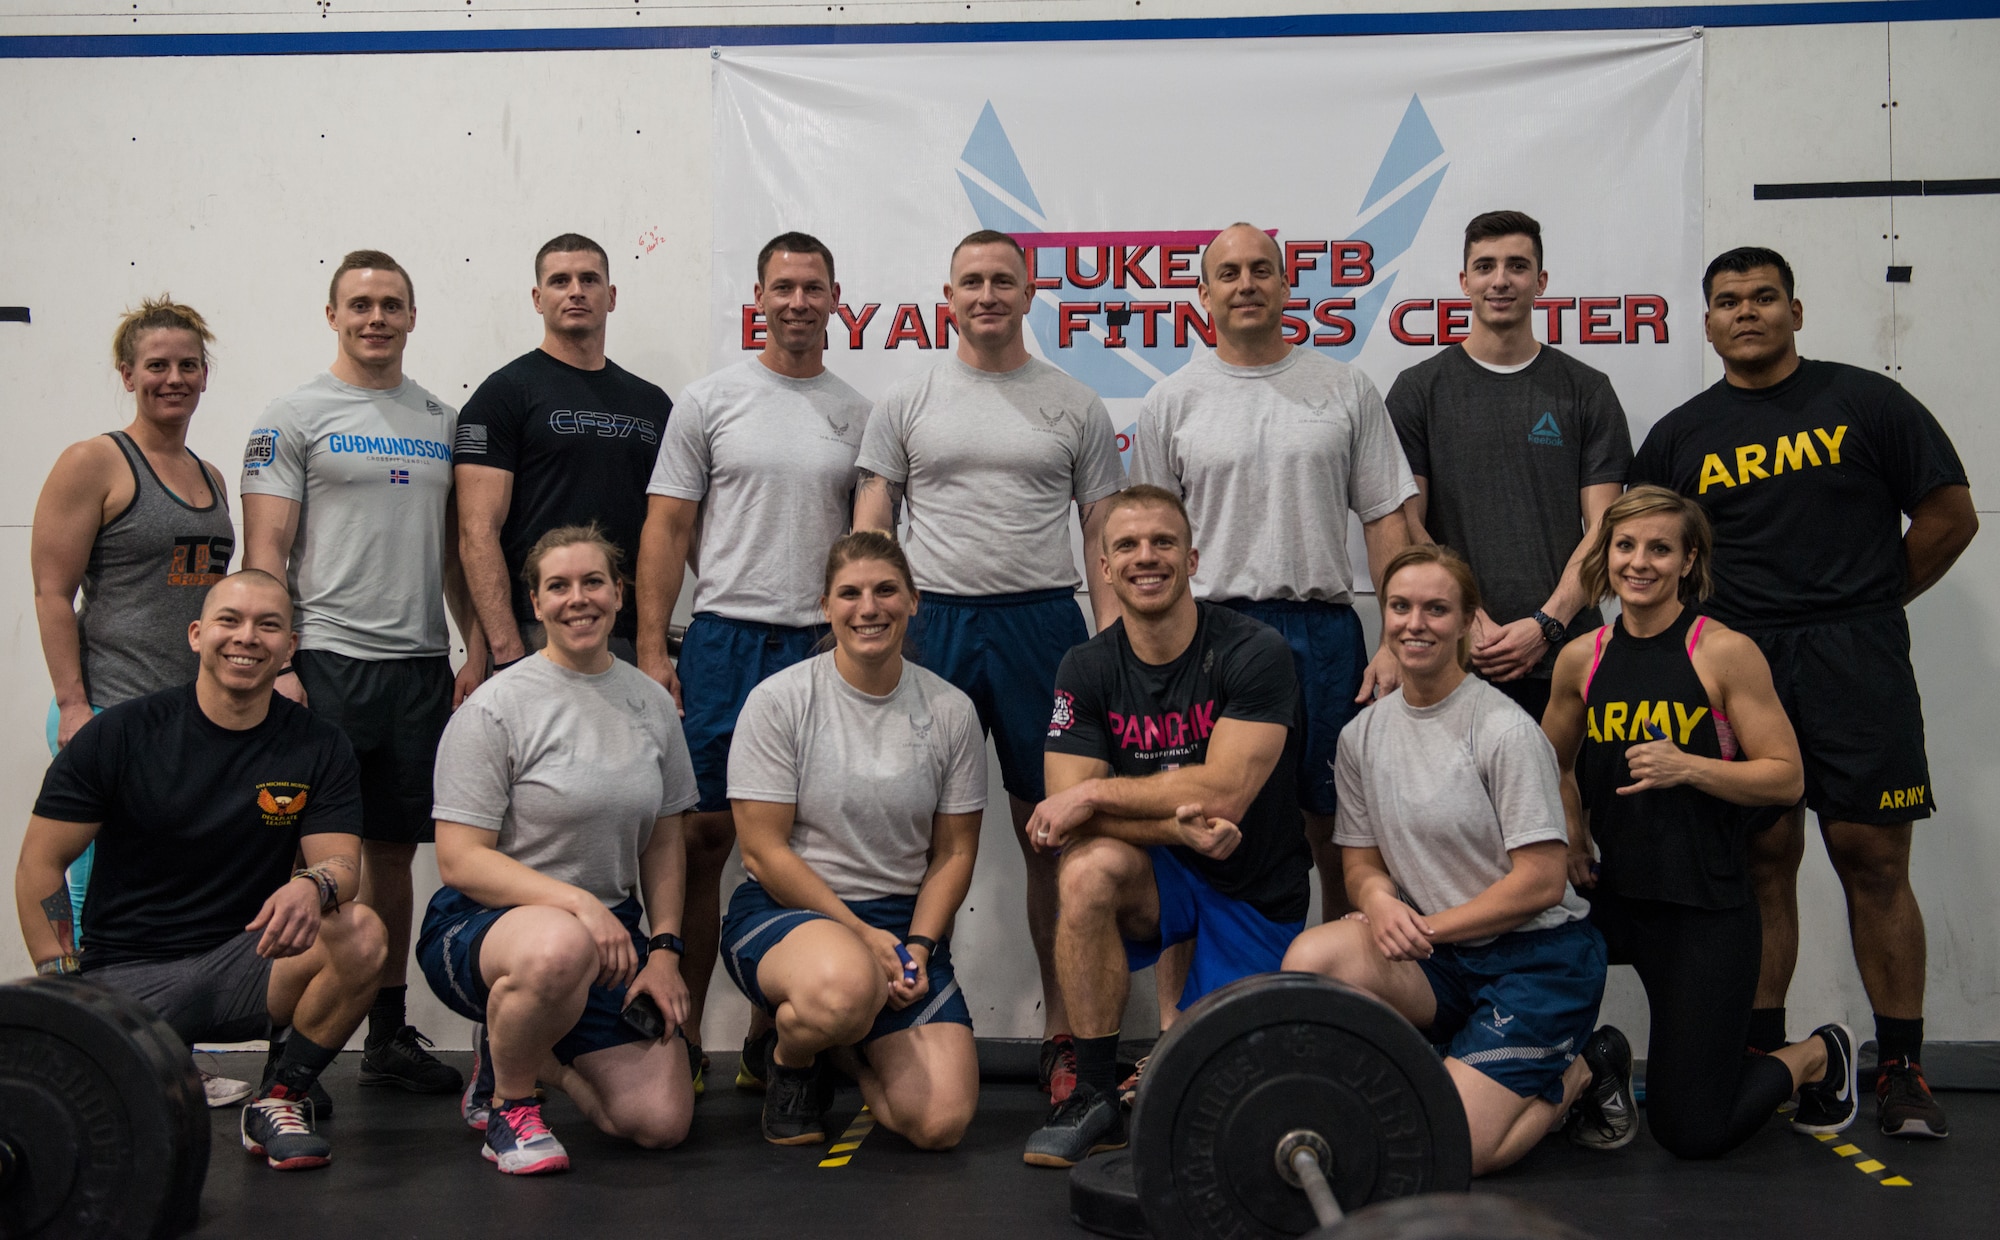 Competitors of the 2018 Reebok CrossFit Games Open 18.4 pose for a group photo at Luke Air Force Base, Ariz., March 15, 2018. The Crossfit Open allows competitors to register online and compete on their own or at local Crossfit boxes. (U.S. Air Force photo by Airman 1st Class Alexander Cook)